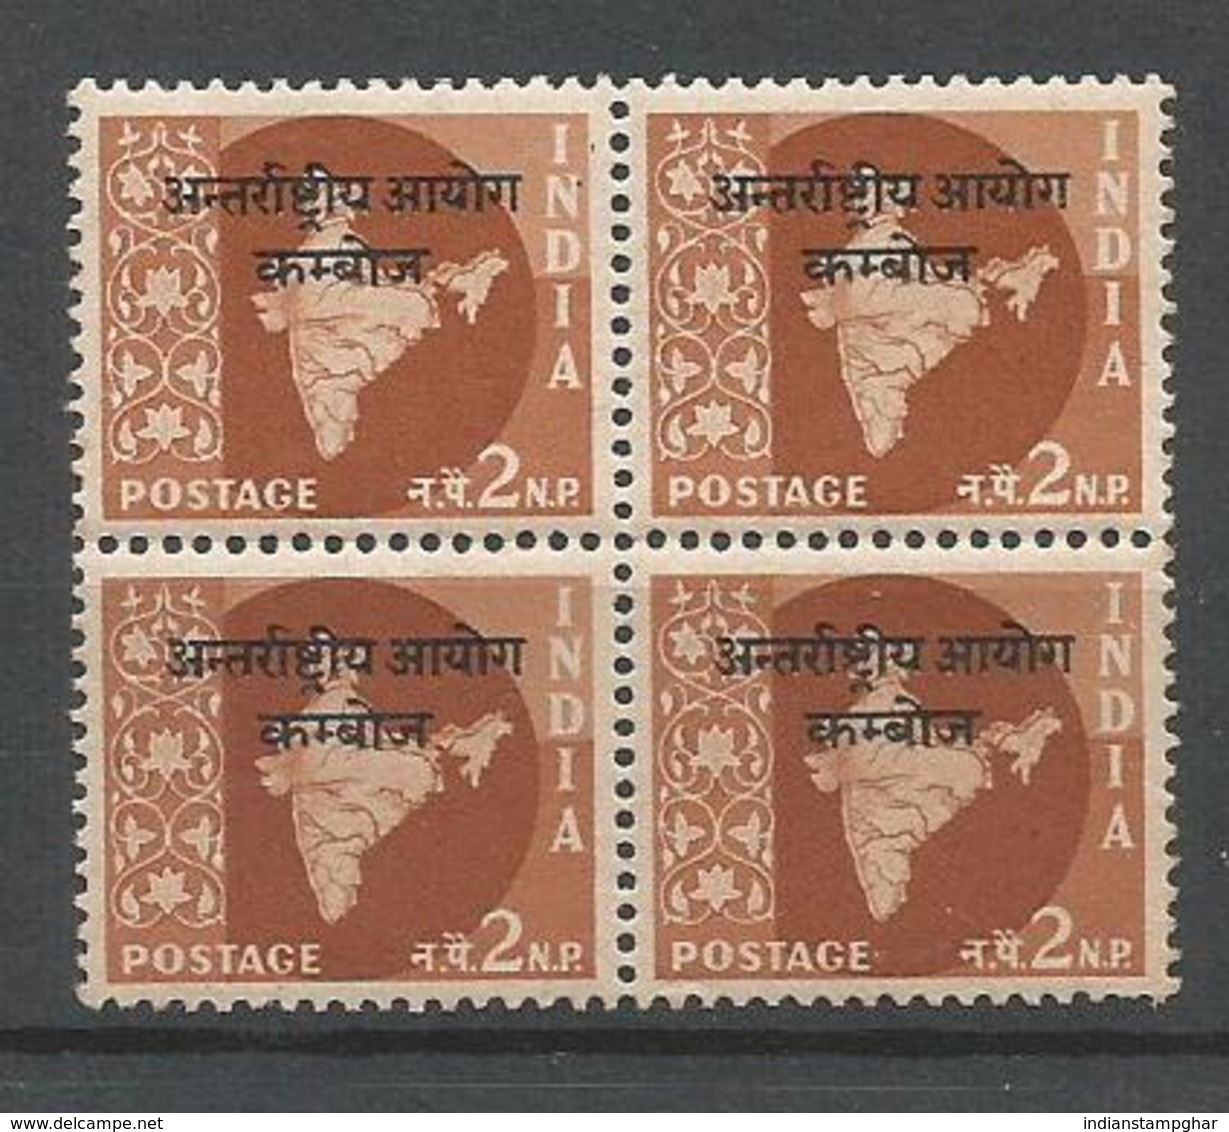 Cambodia Opvt. On 2np Map, Block Of 4, MNH 1962 Star Wmk, Military Stamps, As Per Scan - Franquicia Militar